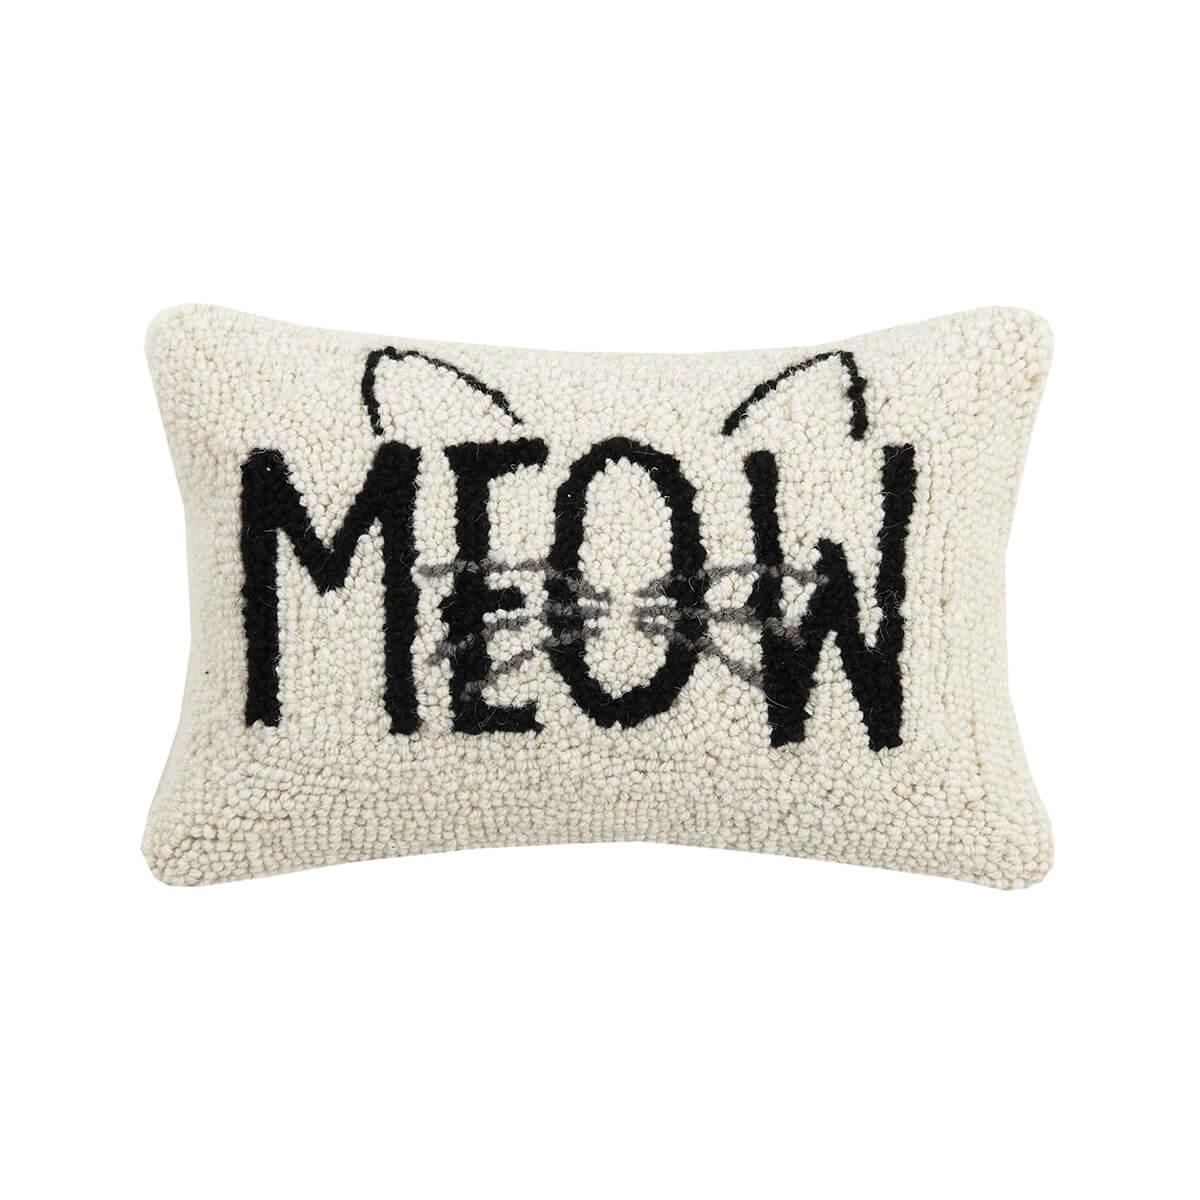  Hooked Meow Pillow